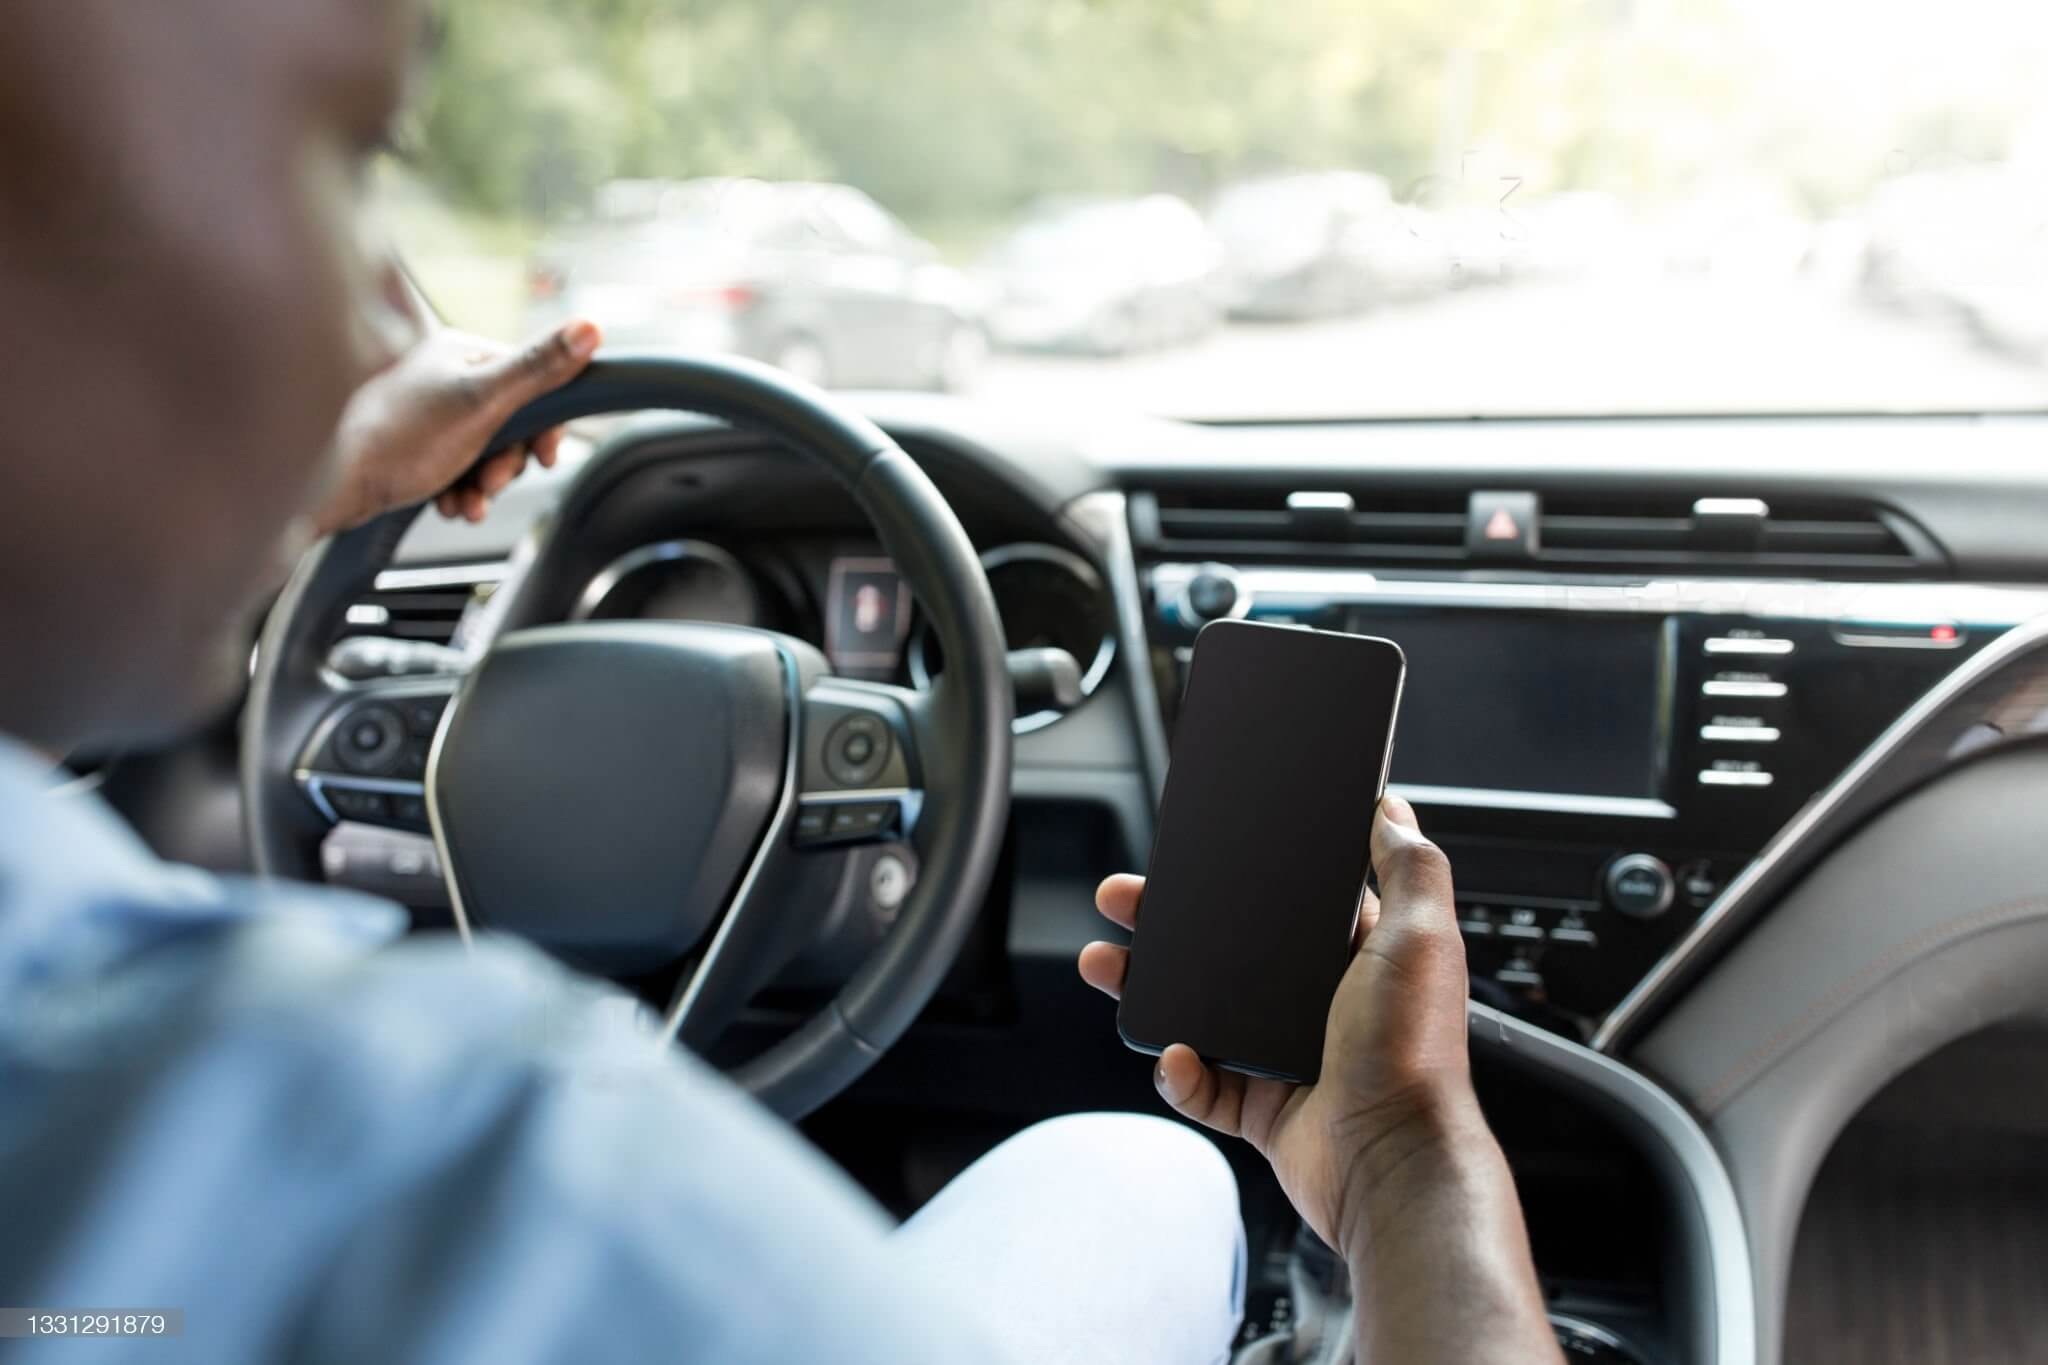 Distracted driving accidents: how to prove the other driver’s fault and get fair compensation